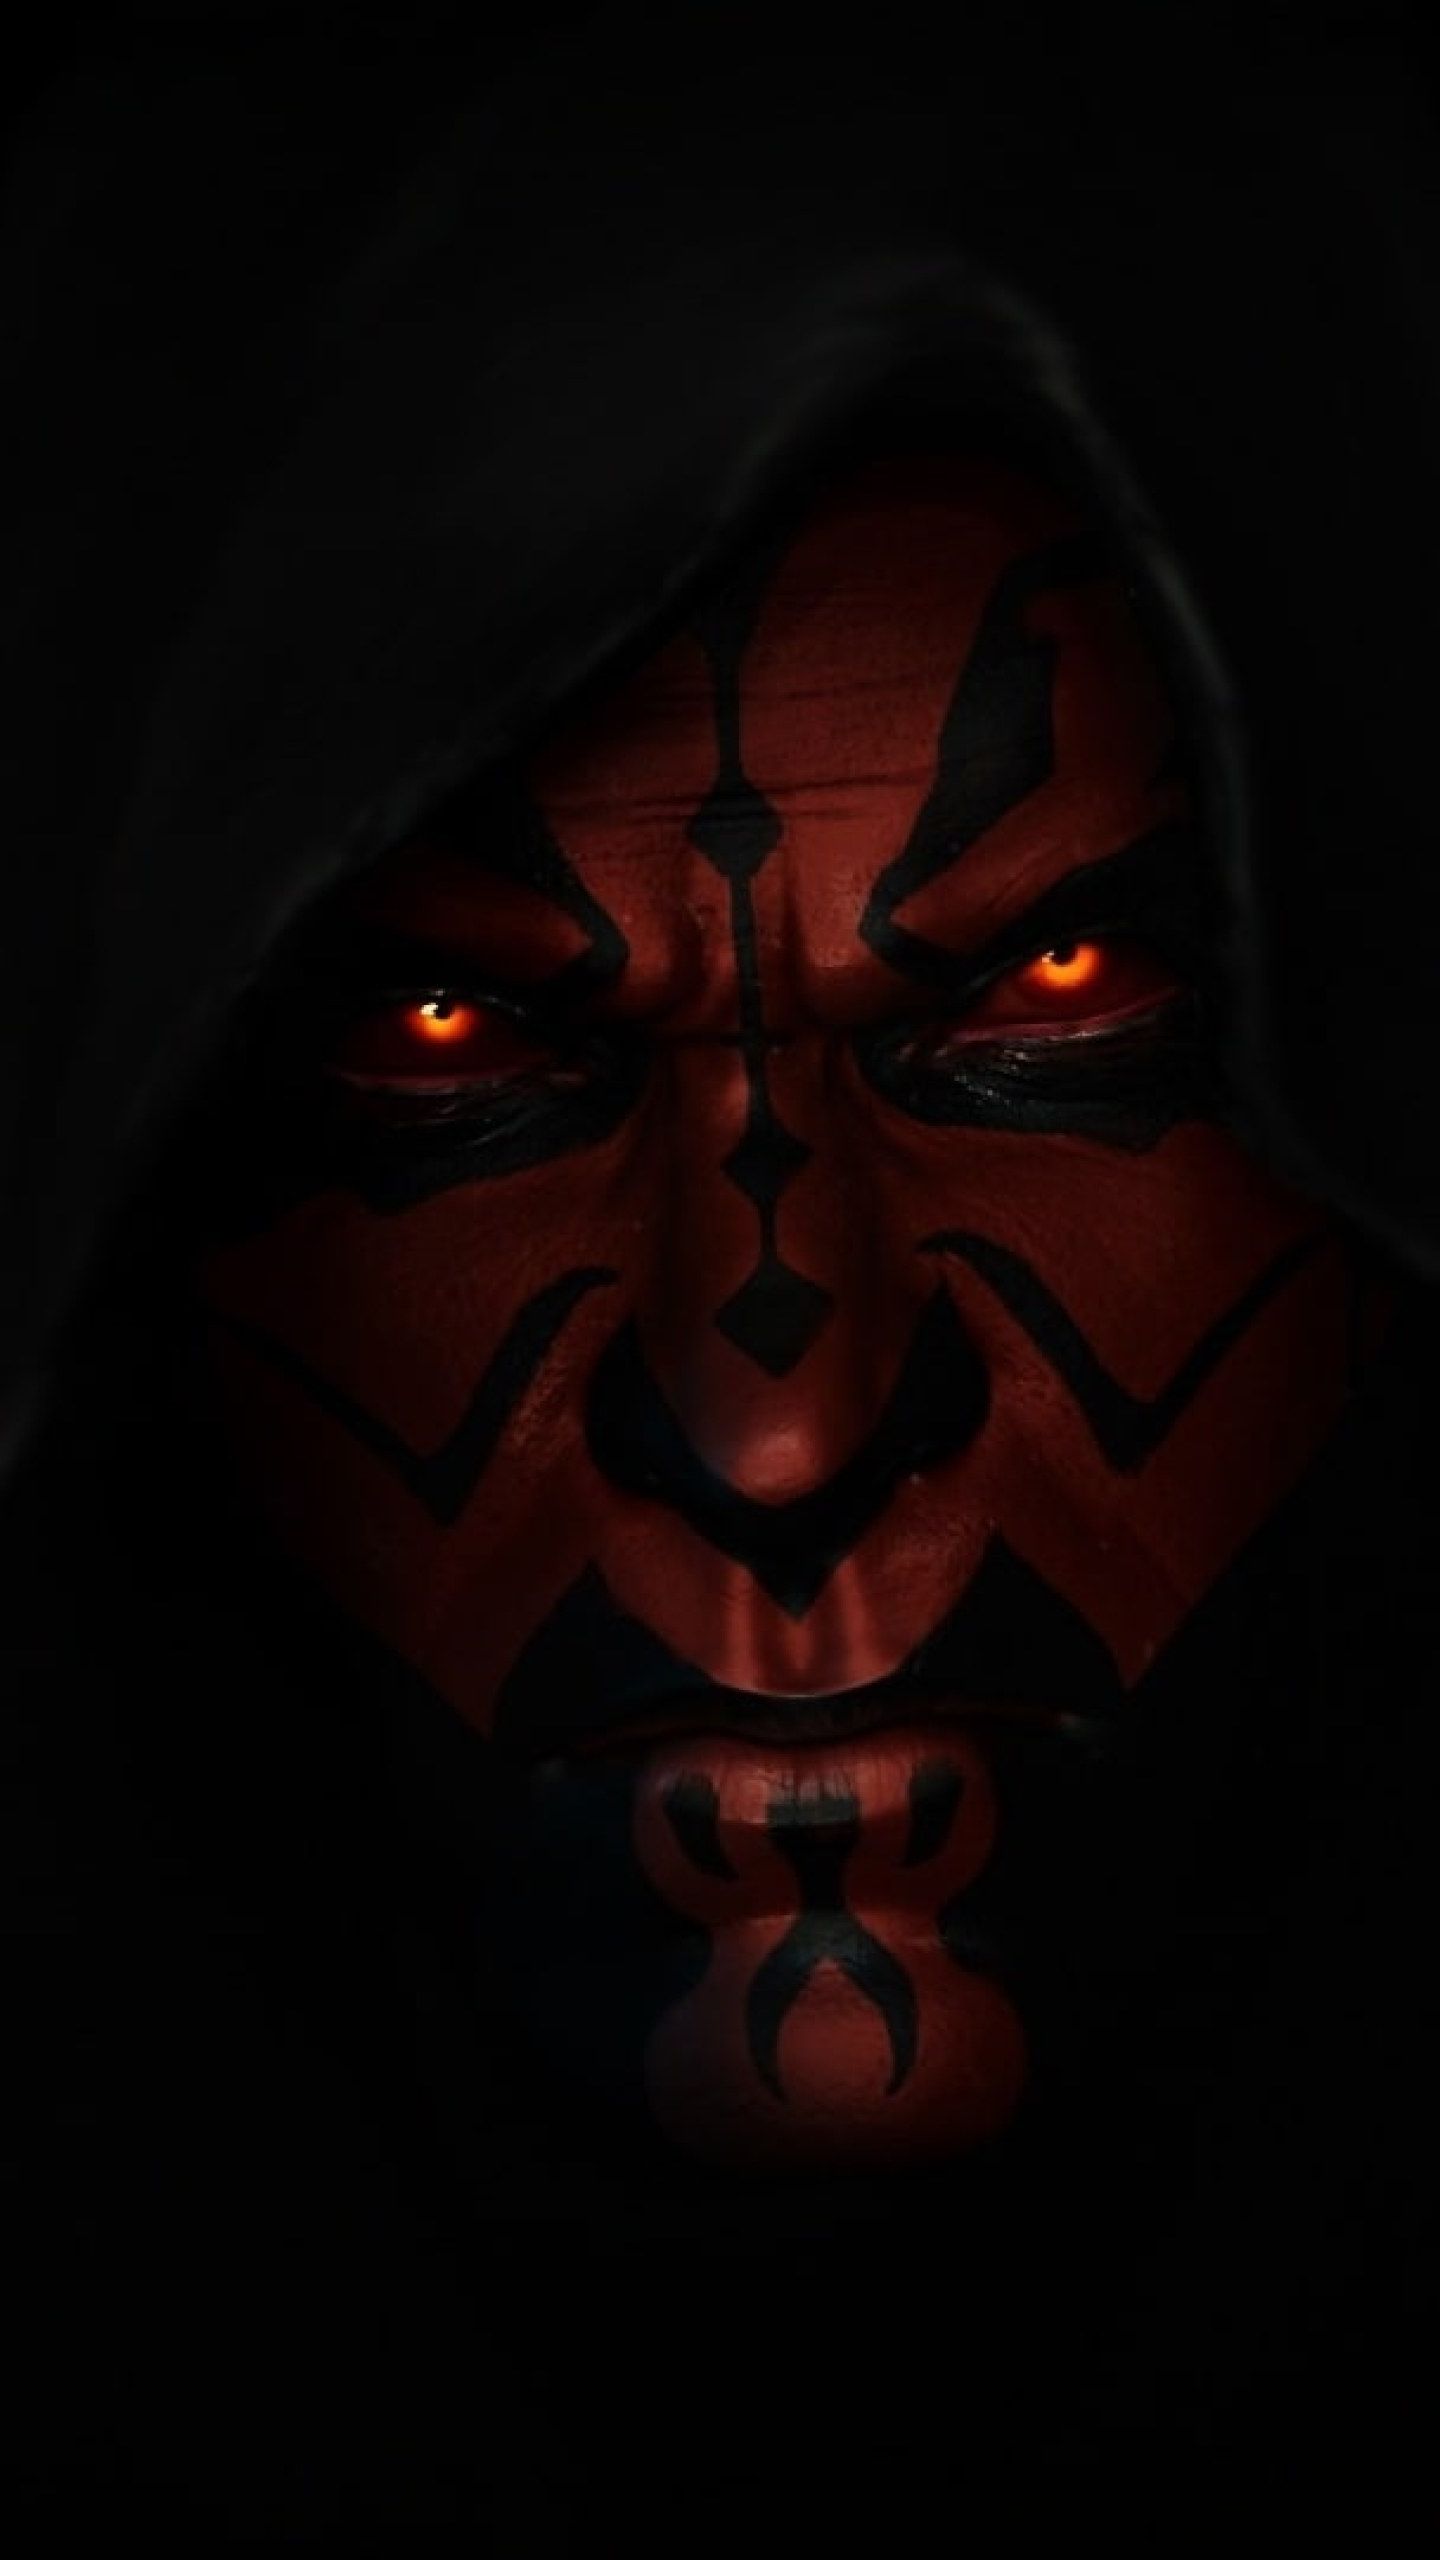 Person wearing hood wallpaper, Star Wars, Darth Maul, A Sith Lord wallpaper • Wallpaper For You HD Wallpaper For Desktop & Mobile